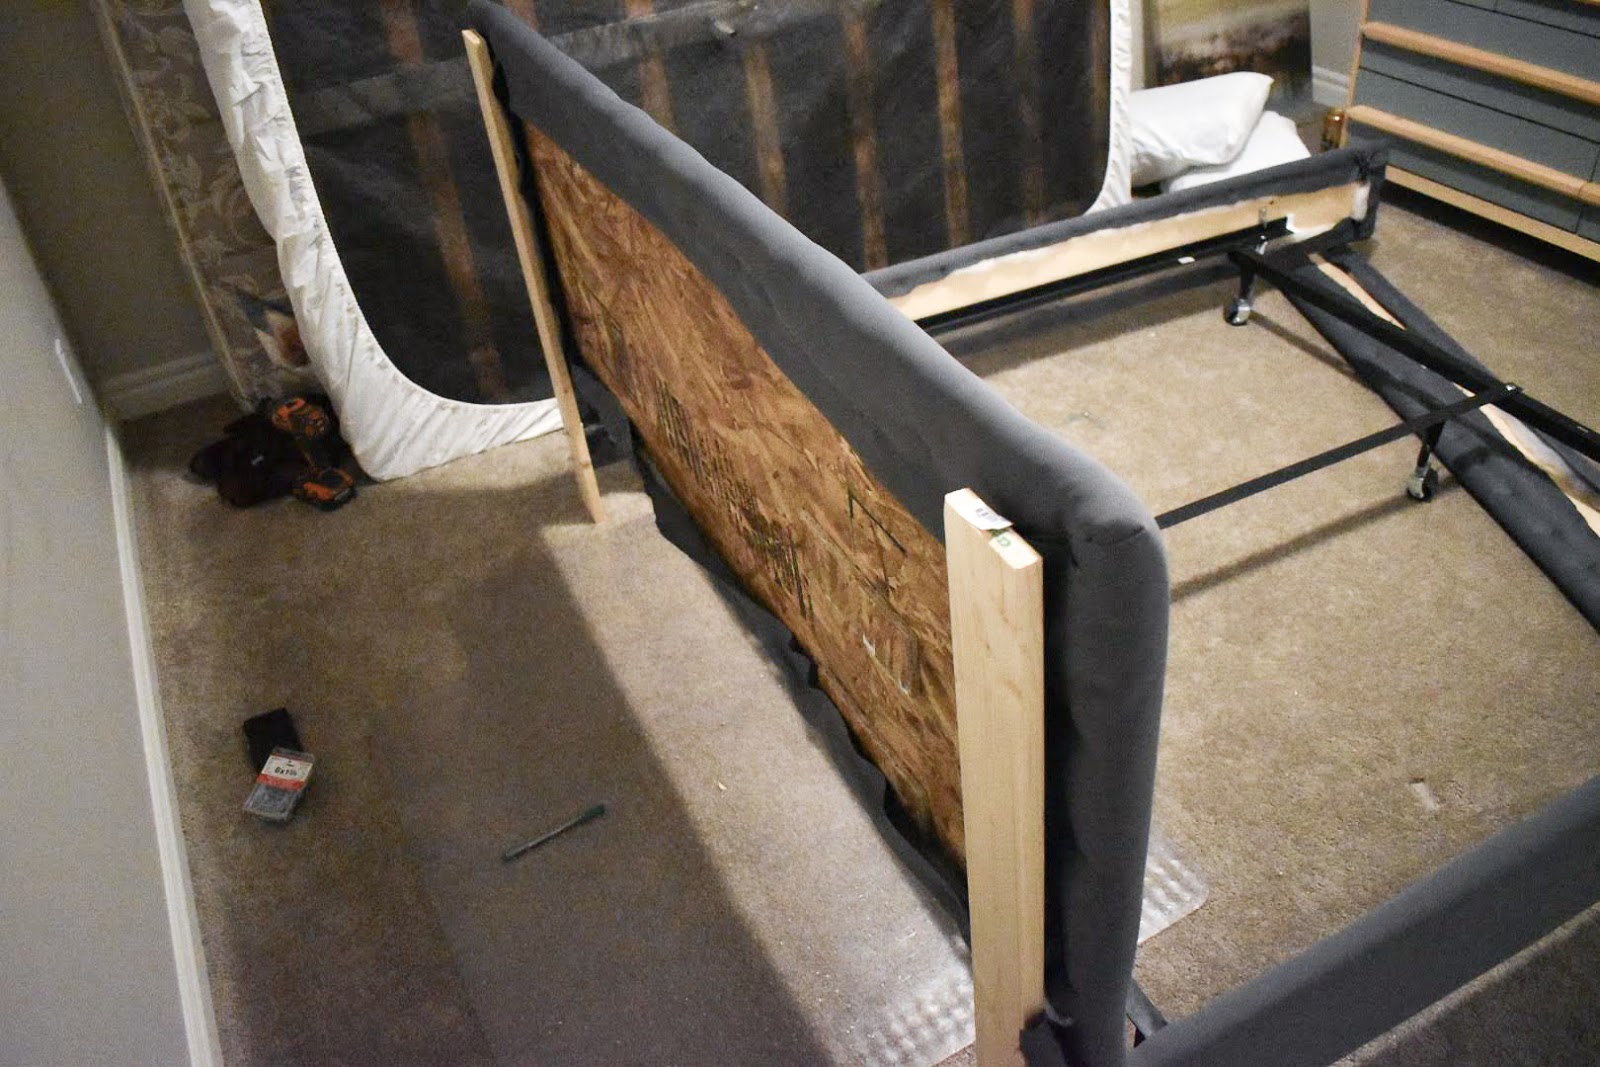 Metal Bed Frame Into An Upholstered, Can You Attach A Headboard To Metal Frame